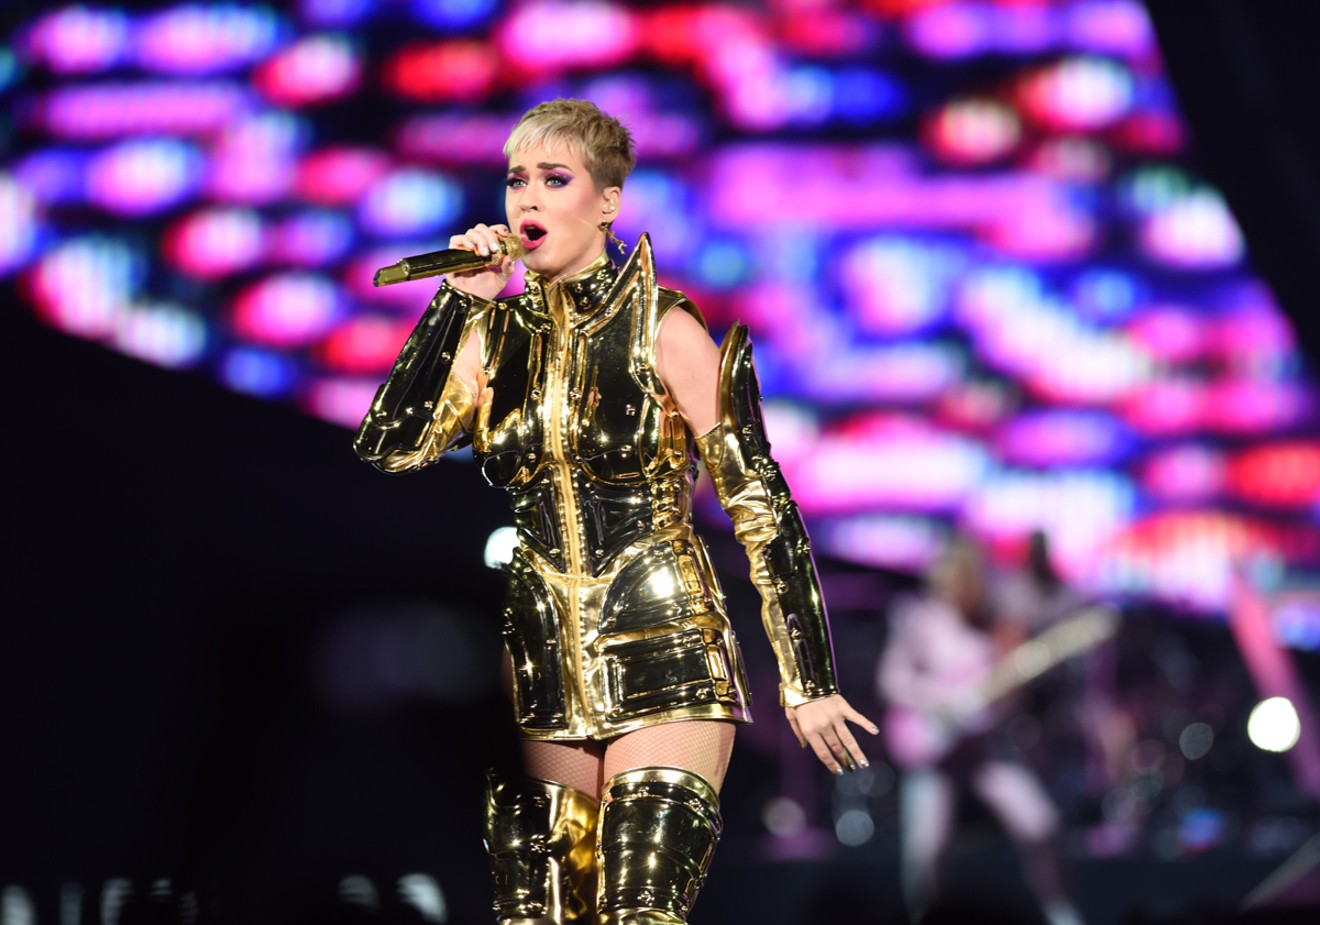 See more photos of Katy Perry at the American Airlines Arena here.